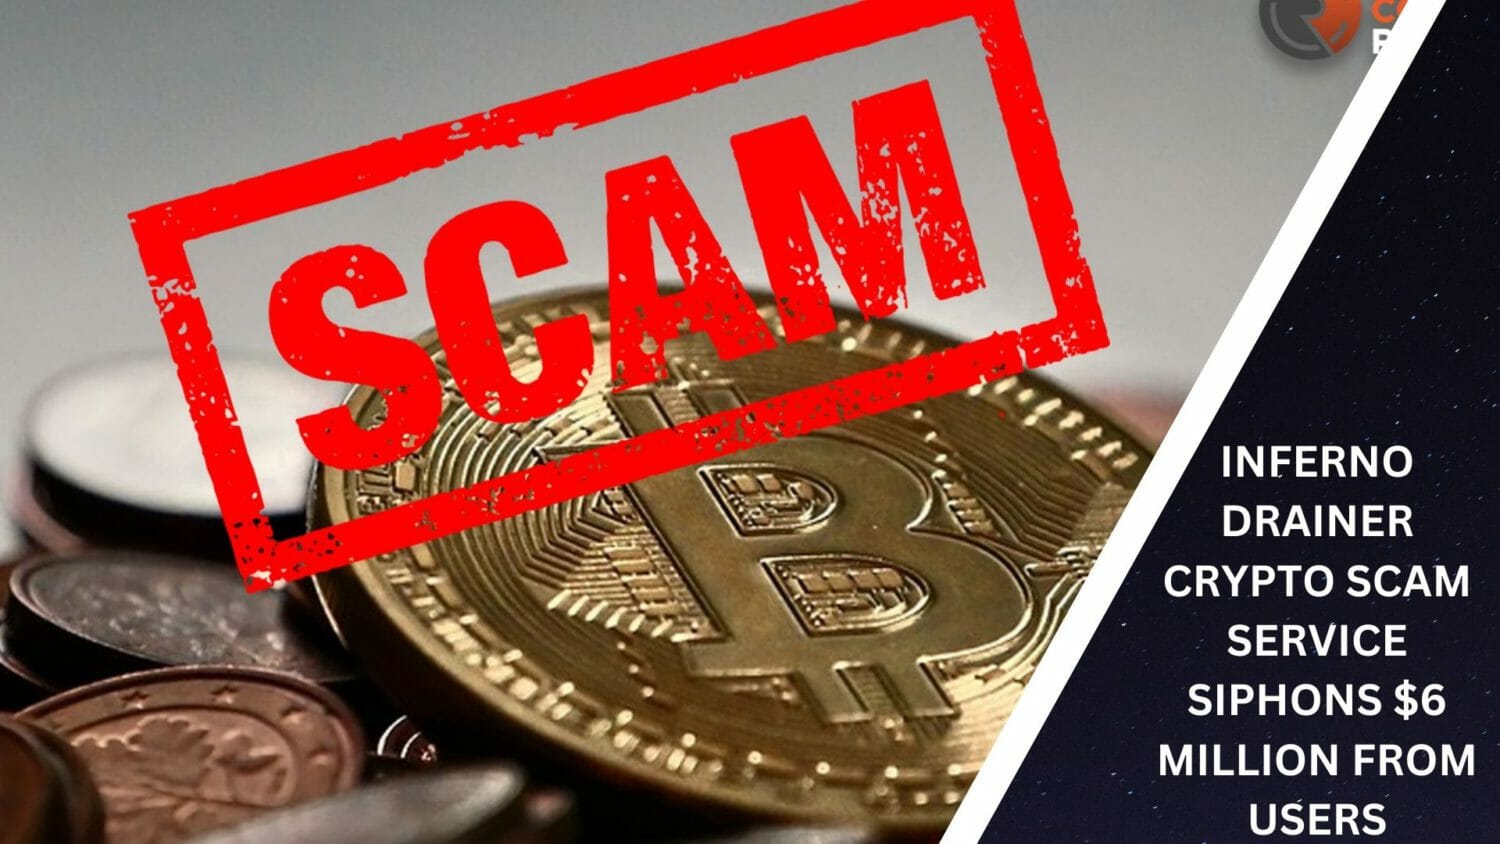 Inferno Drainer Crypto Scam Service Siphons $6 Million From Users